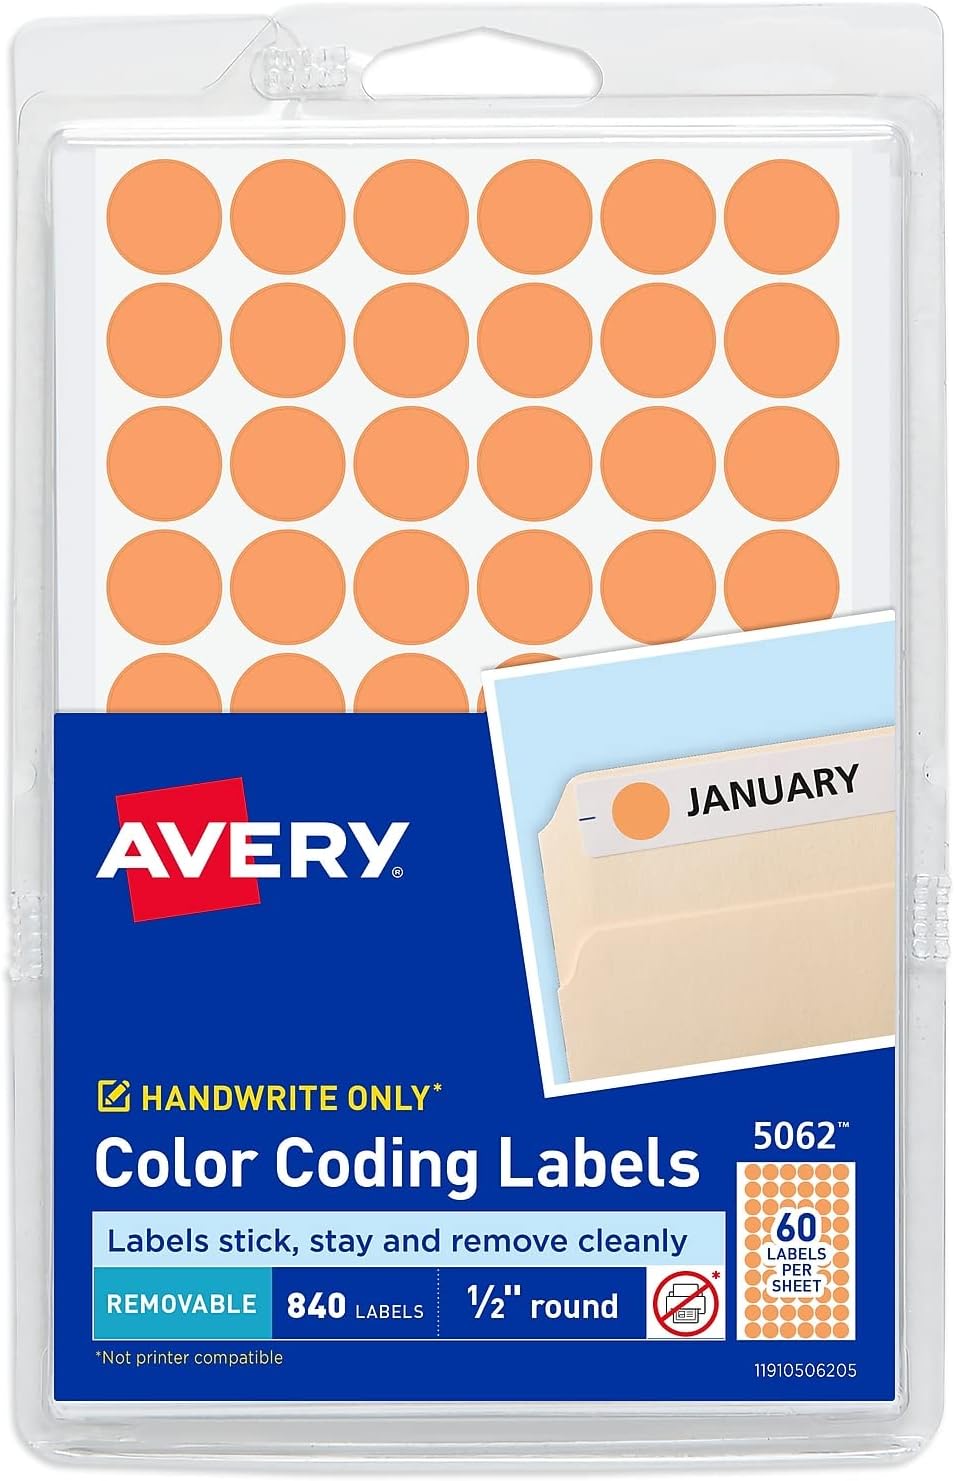 Avery 05062 Handwrite Only Removable Round Color-Coding Labels, 1/2-Inch Dia, Neon Orange,840/Pk